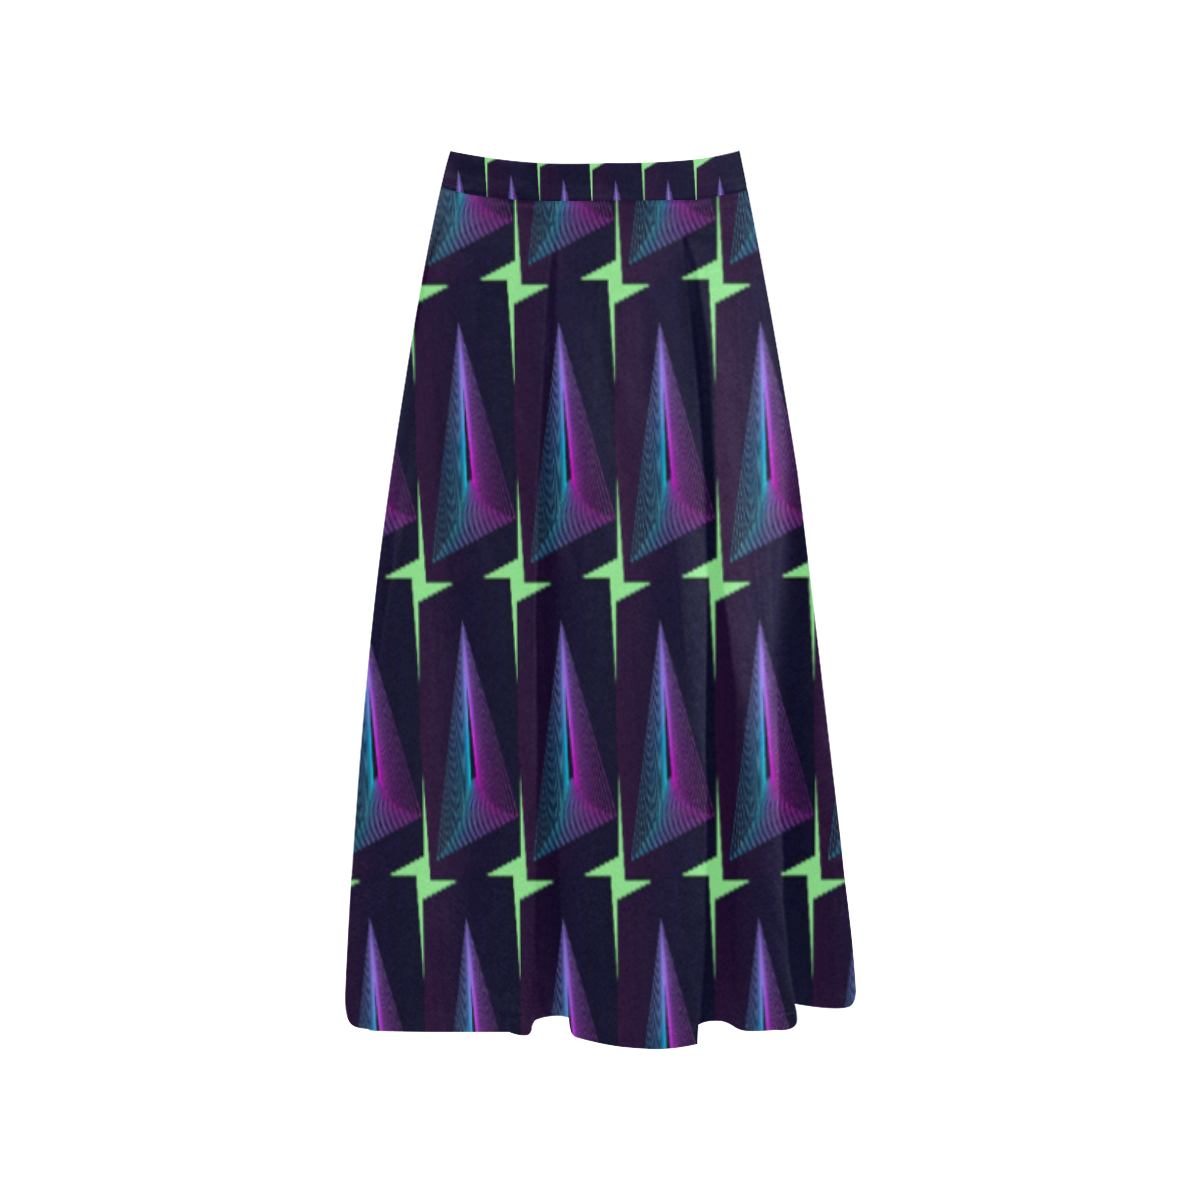 Graphic illusion Aoede Crepe Skirt (Model D16)